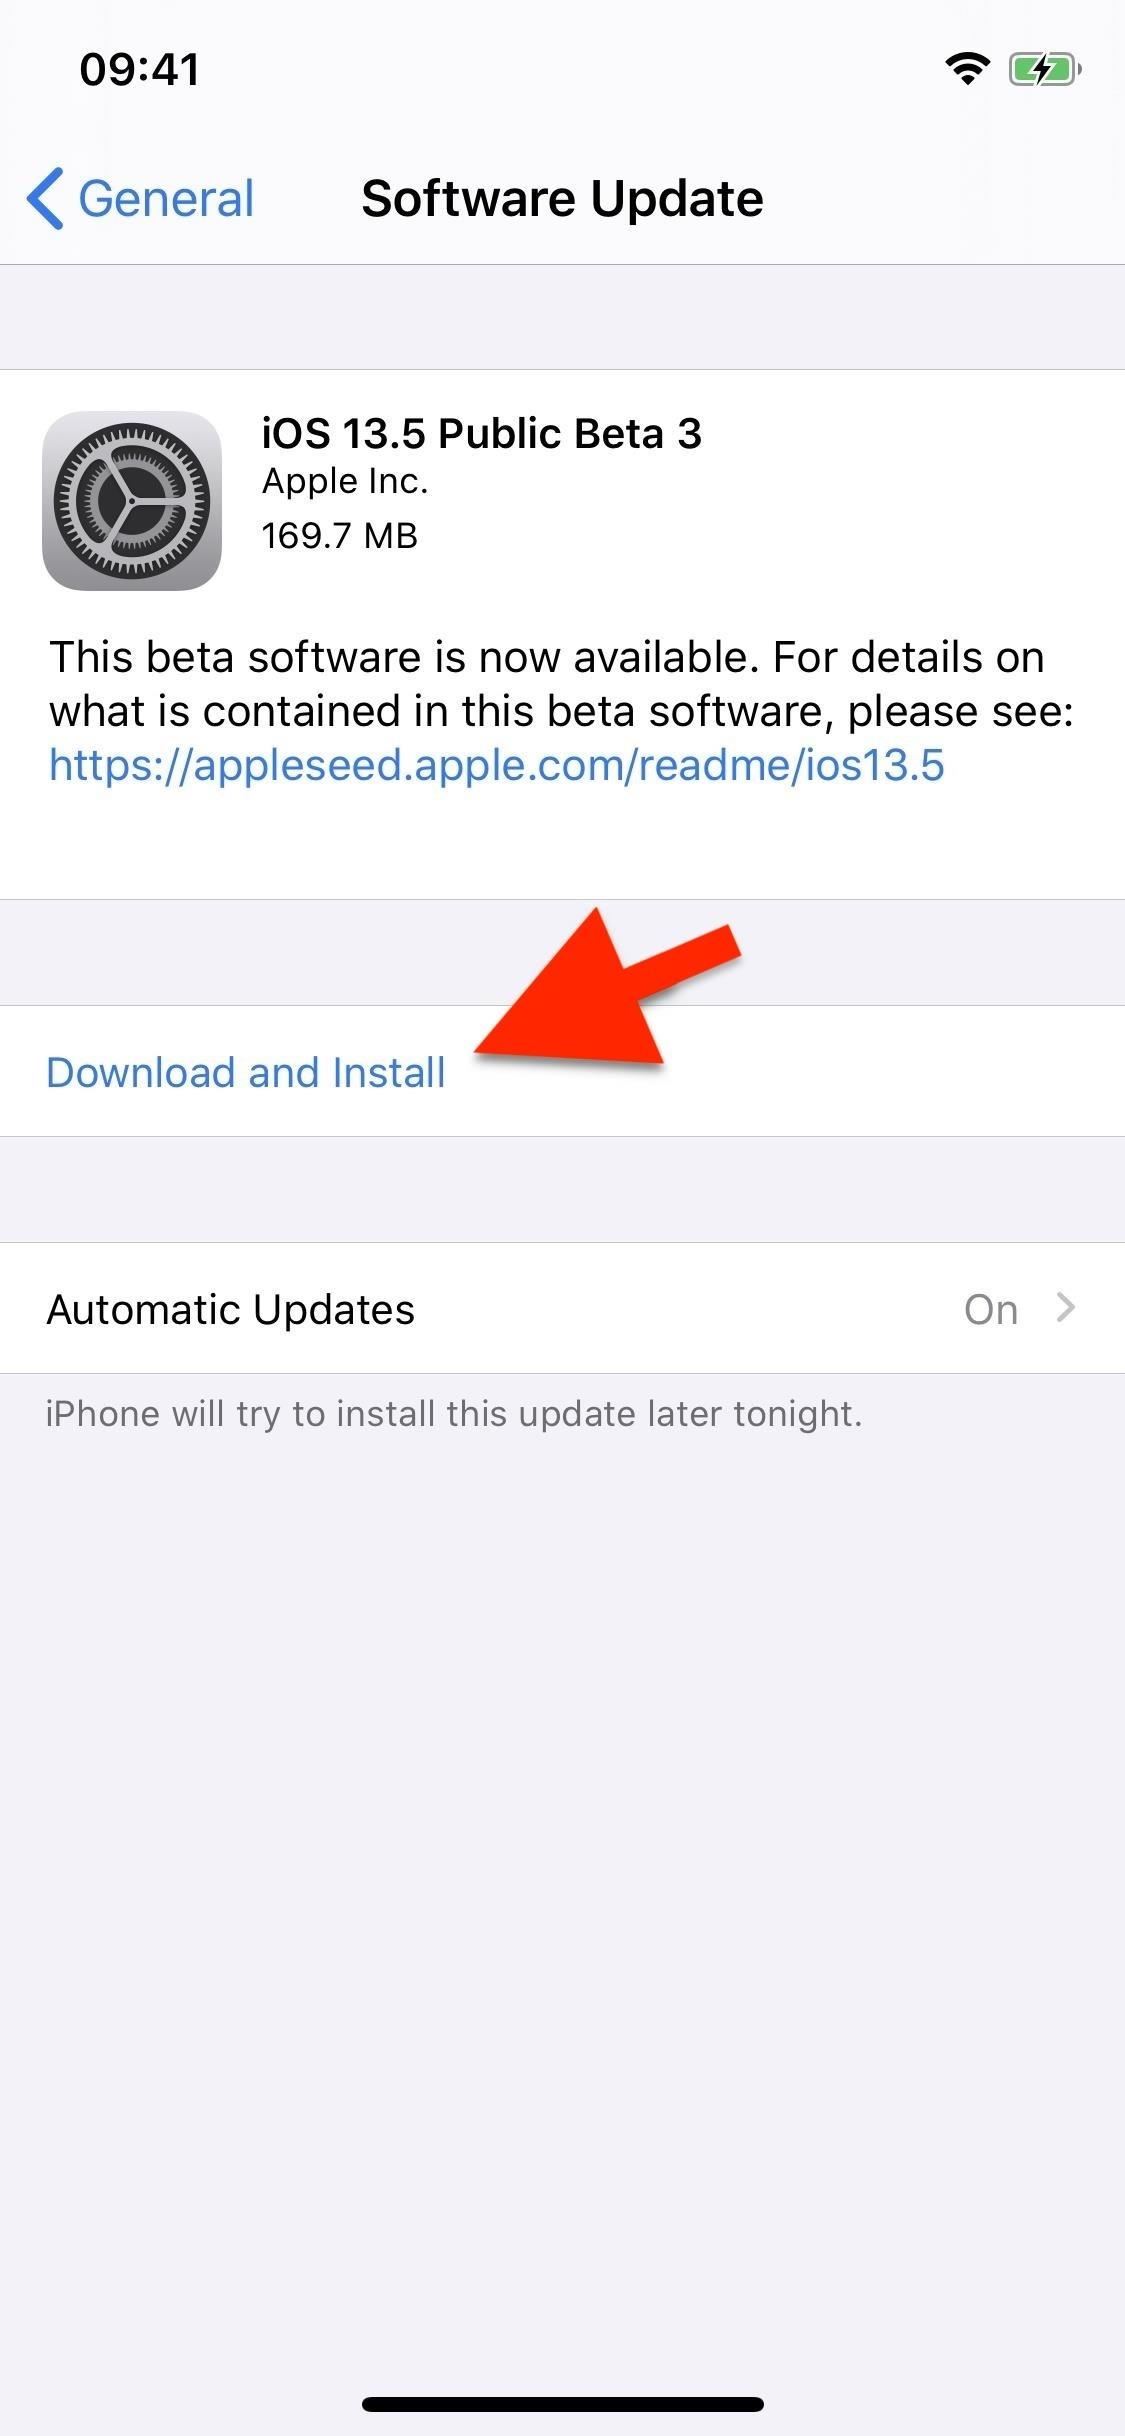 Go to Settings and select Software update.
Click on Download and install to update your phone to the latest software version.